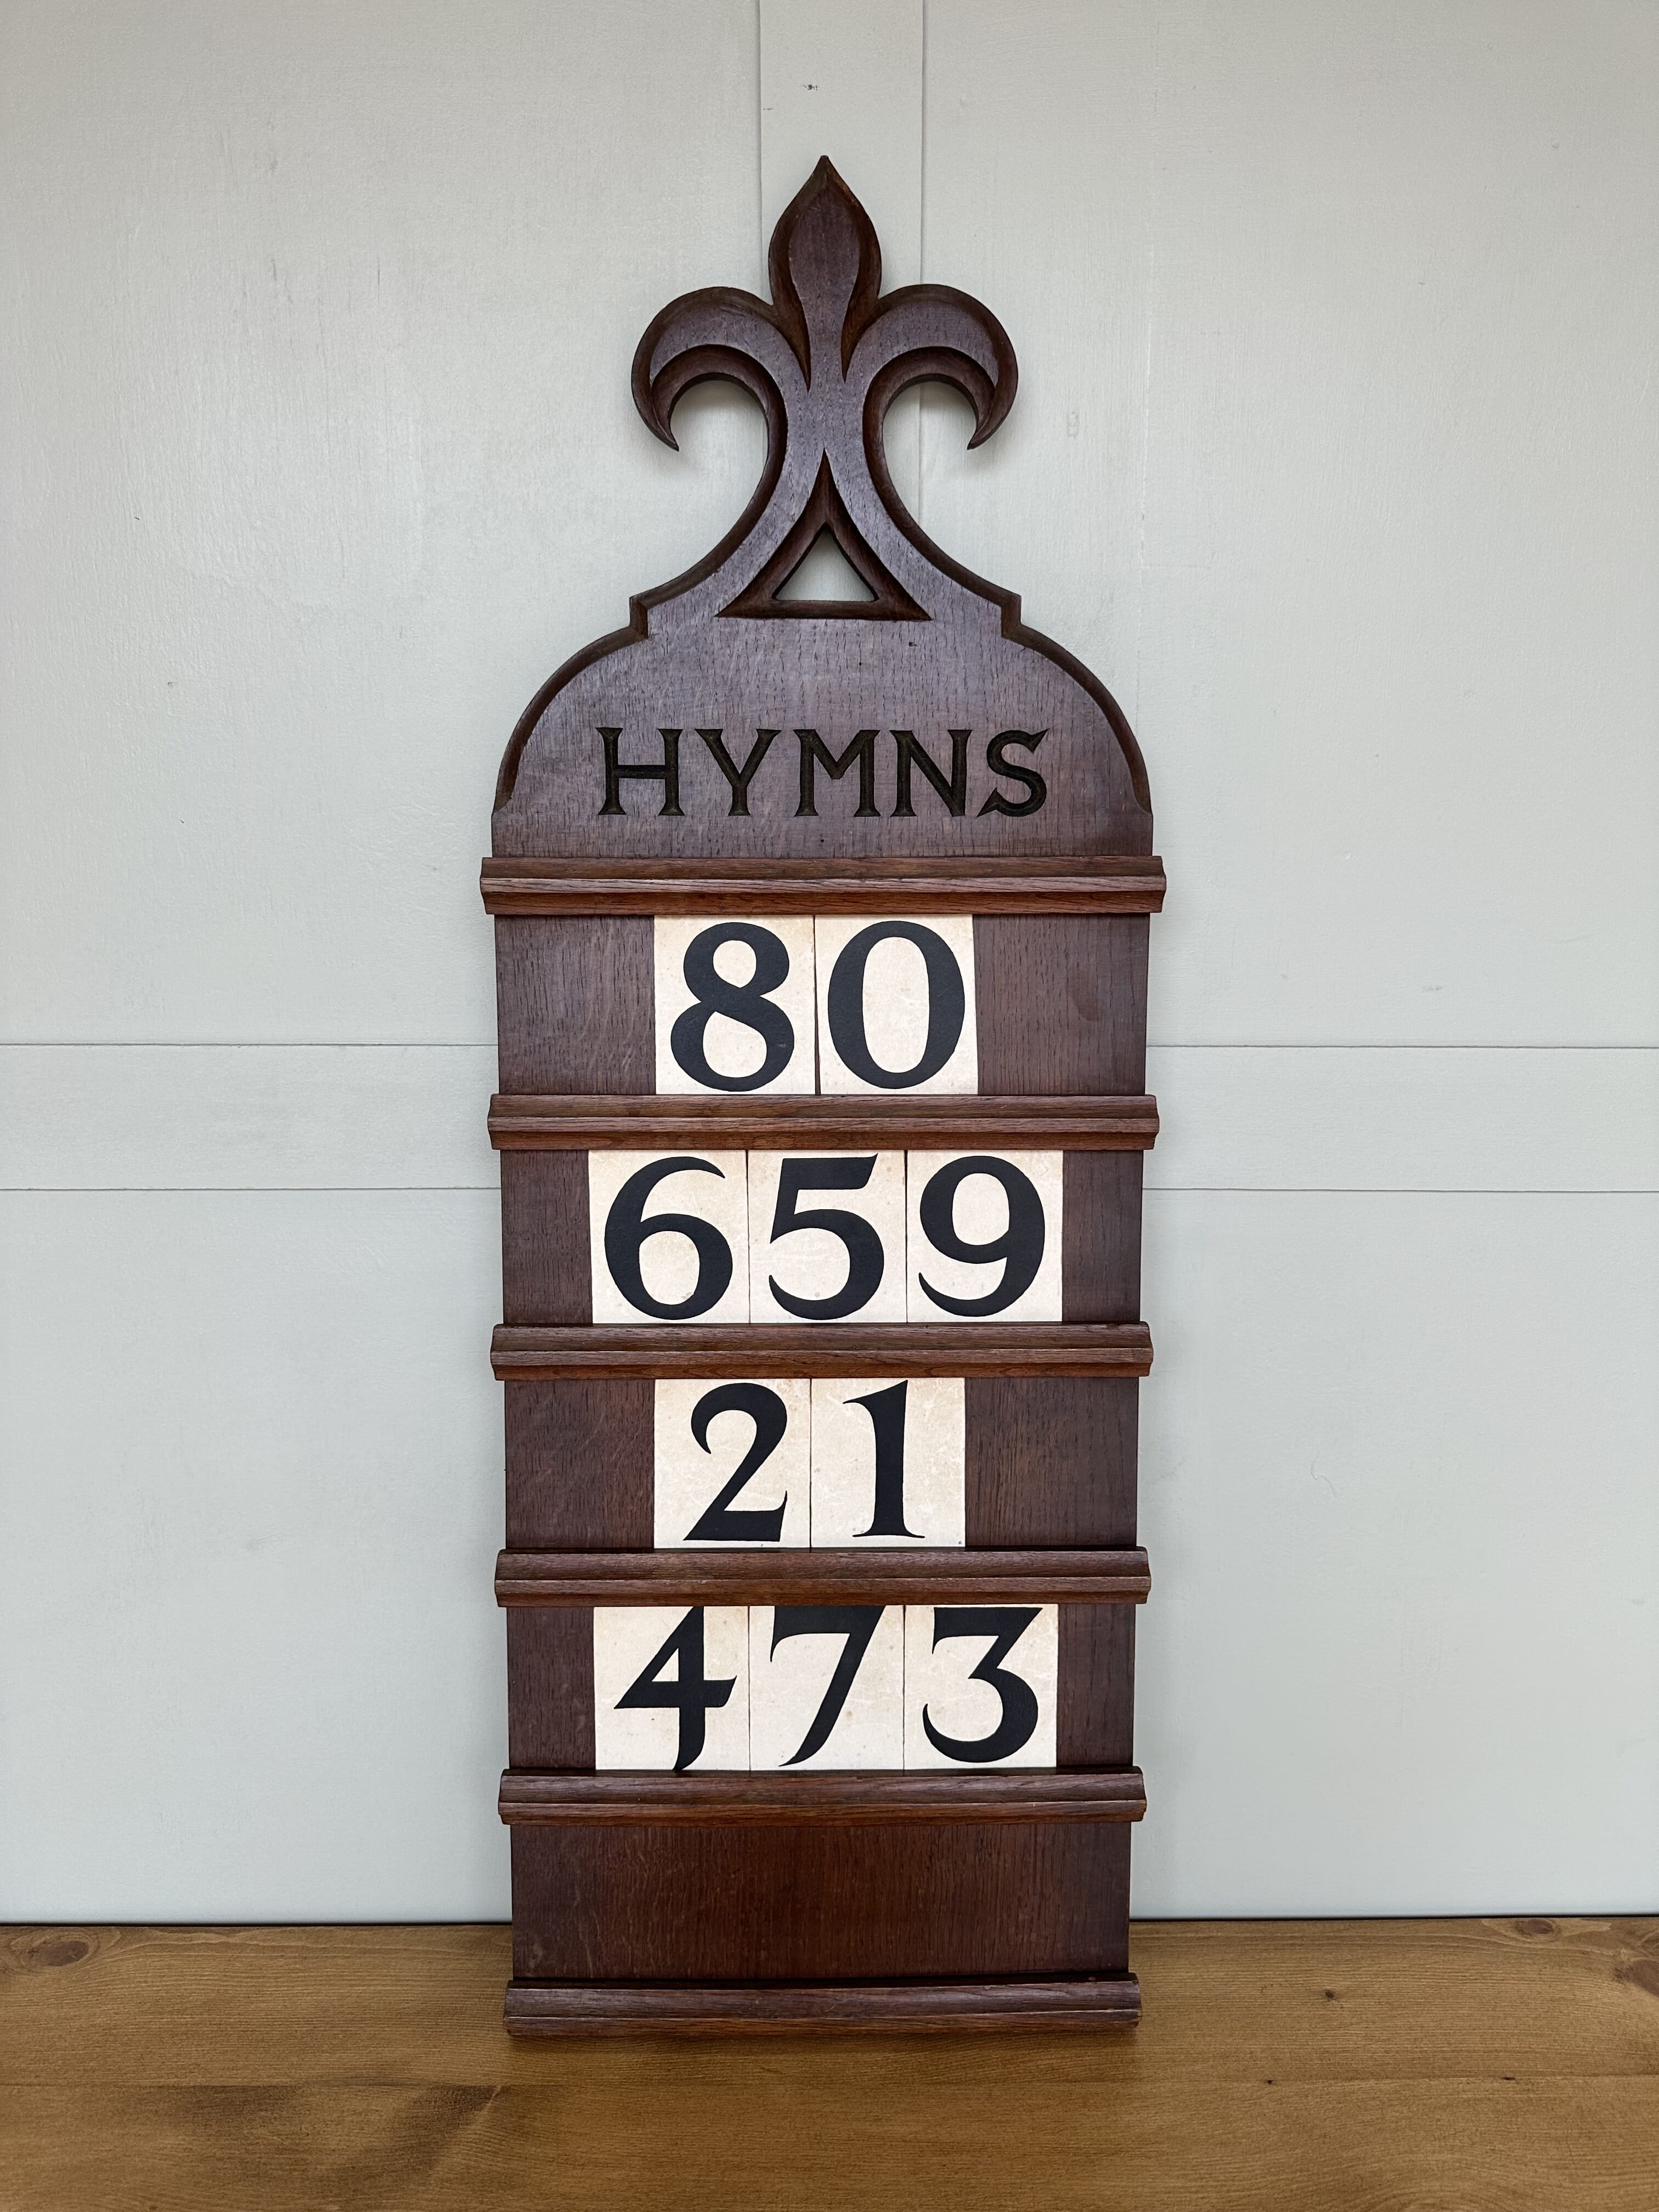 UKAA Have For Sale Antique Hymn Boards